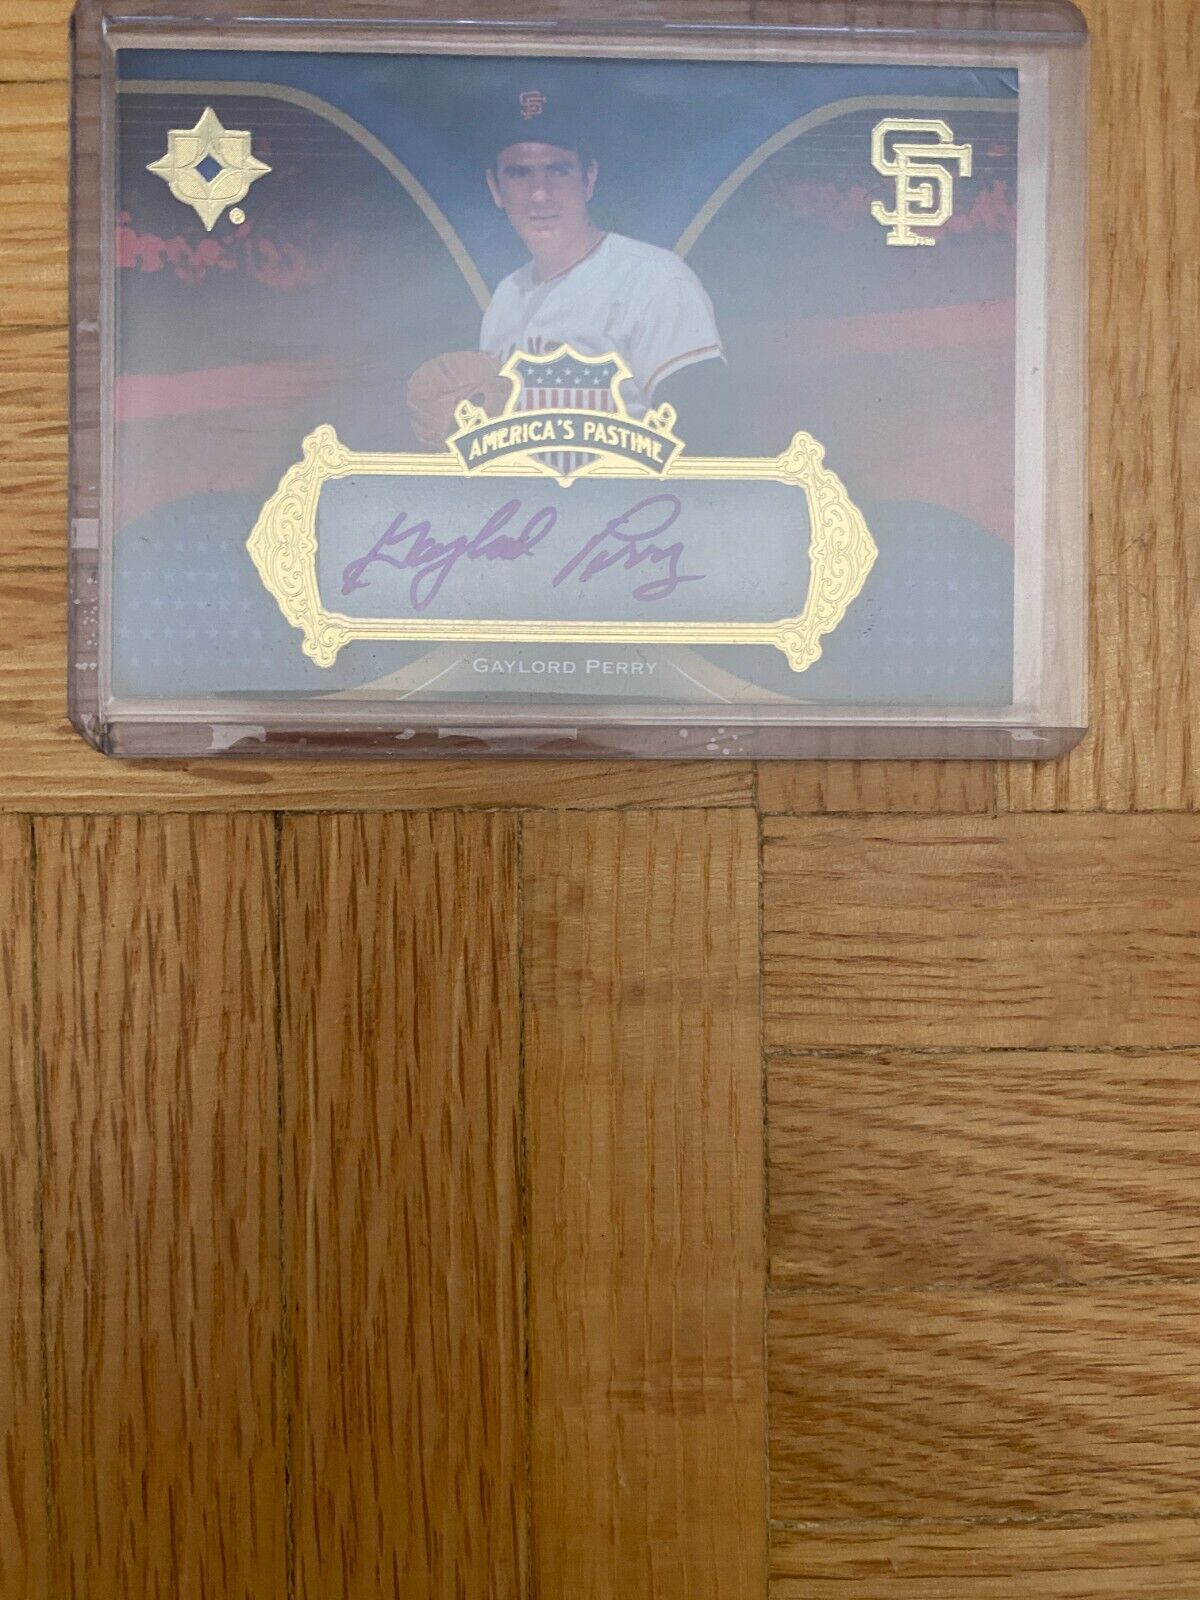 2007 UPPER DECK ULTIMATE COLLECTION GAYLORD PERRY AUTOGRAPH CARD